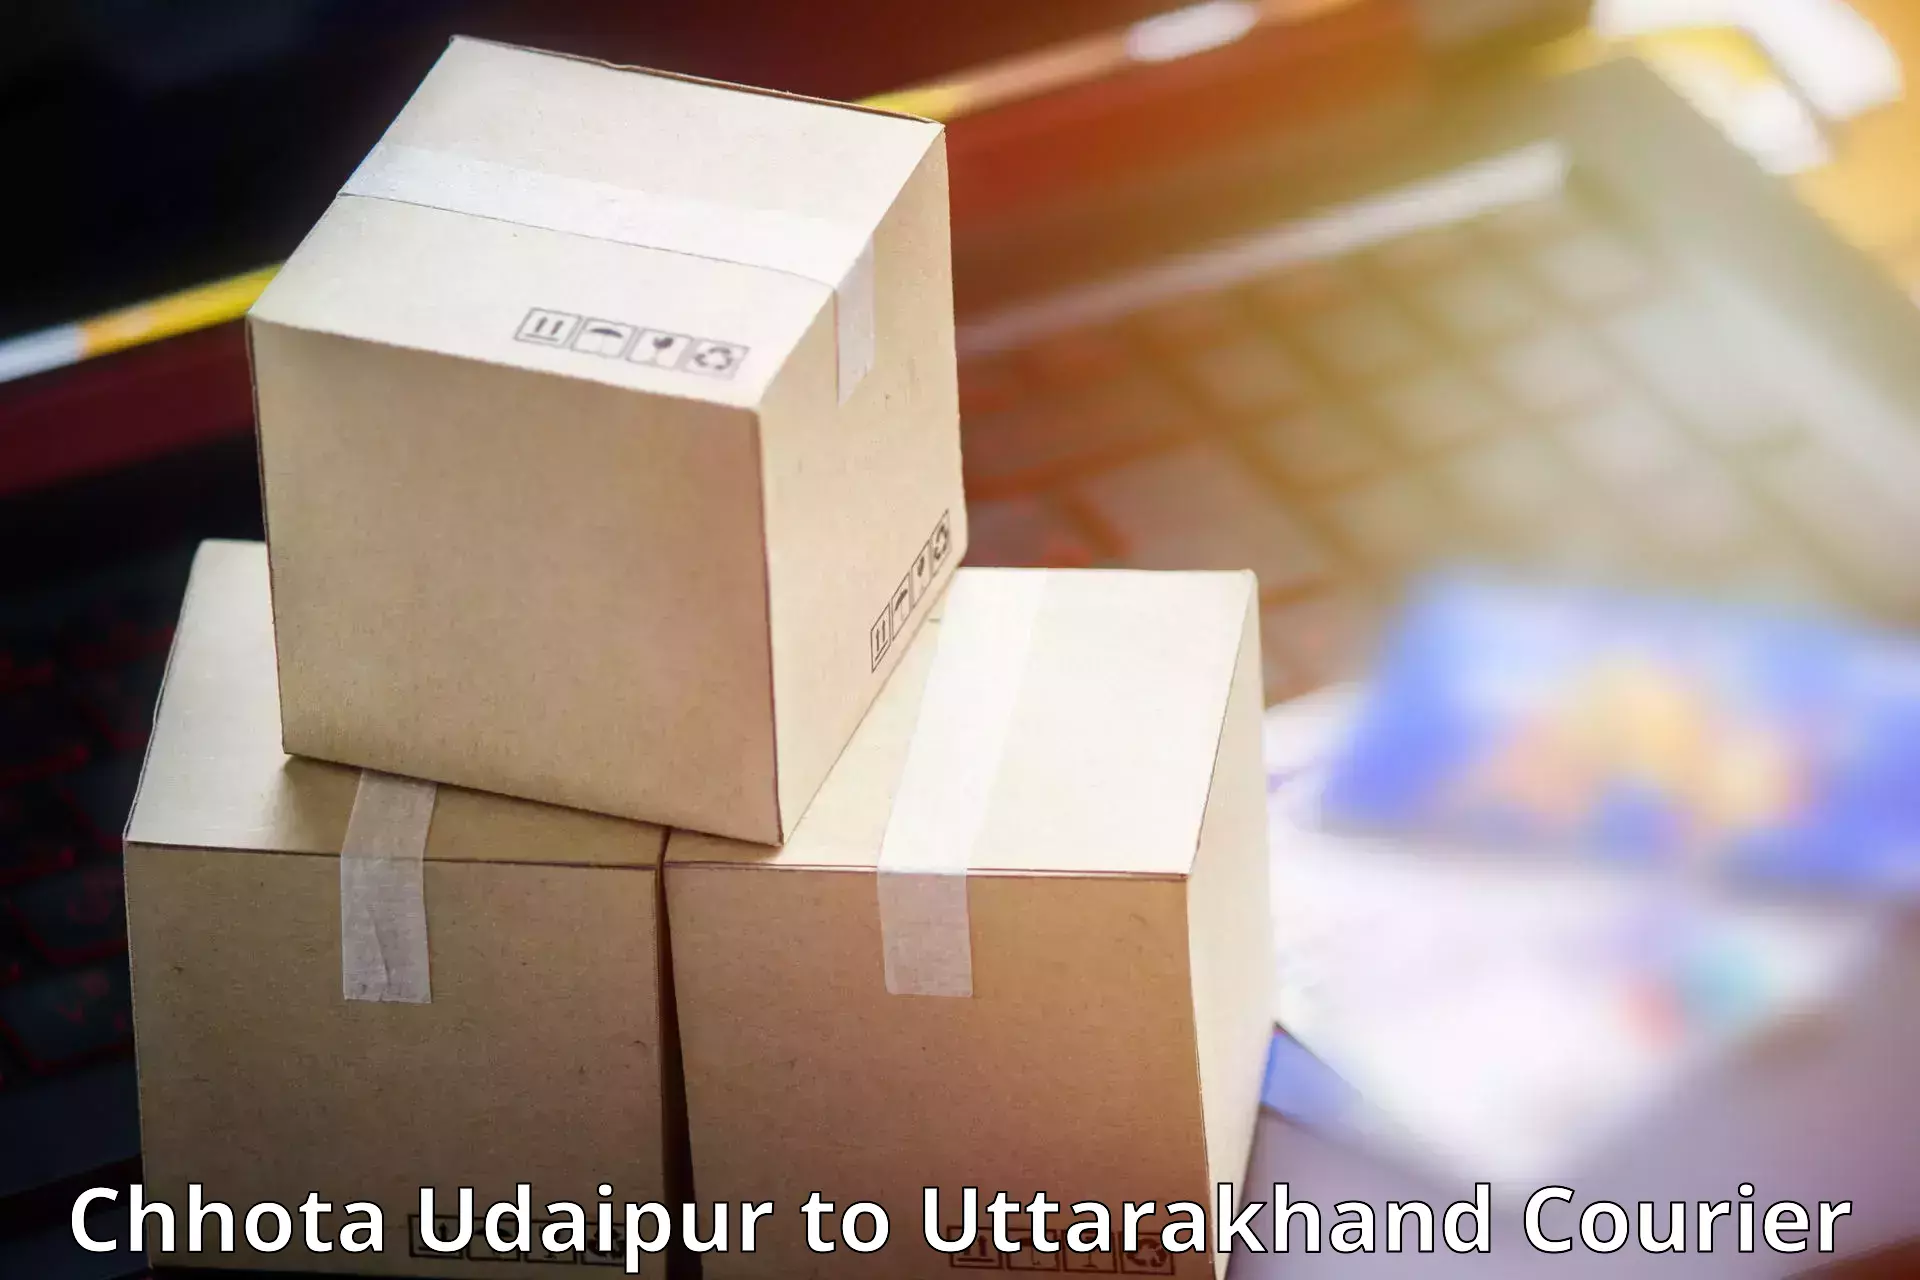 Courier service efficiency in Chhota Udaipur to Pauri Garhwal